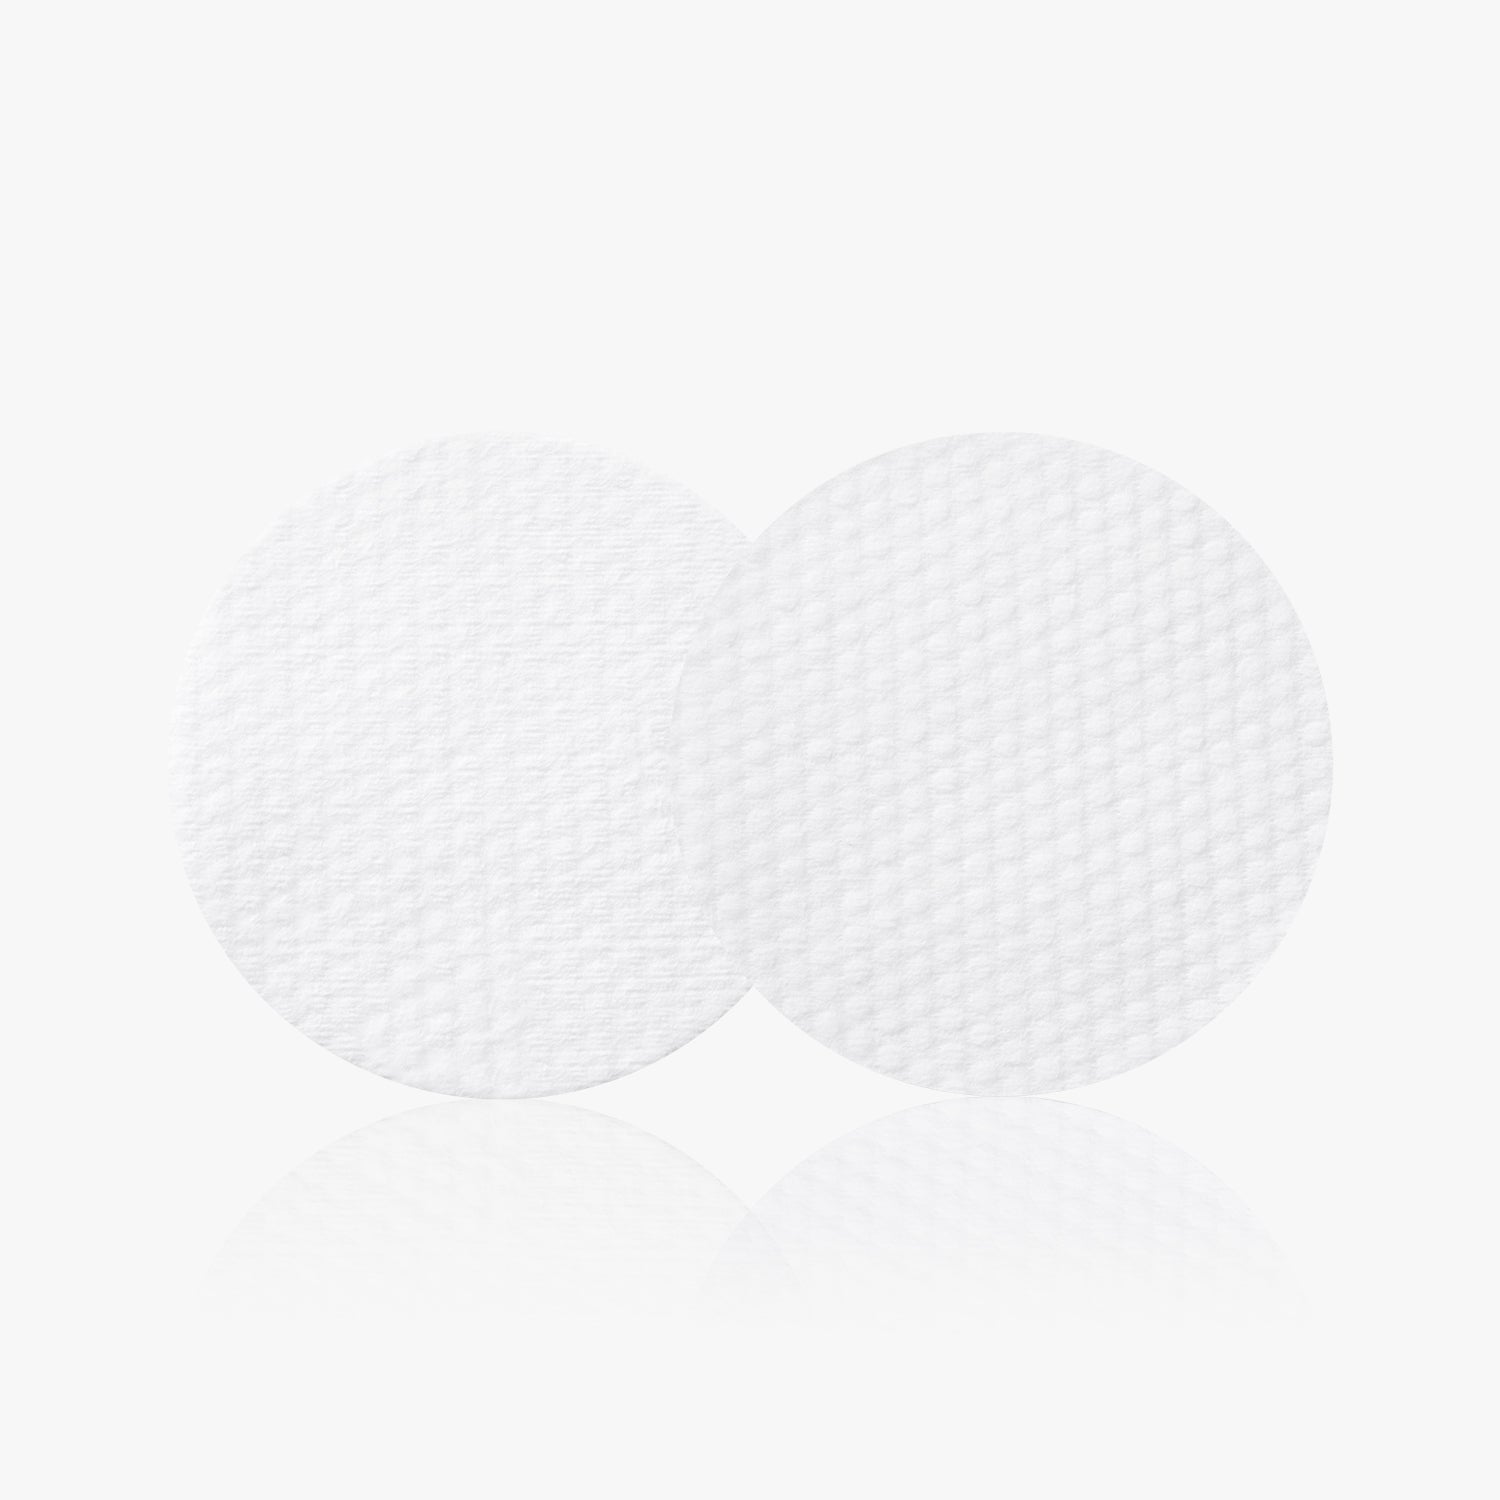 Skin Conditioning Makeup Remover Pad